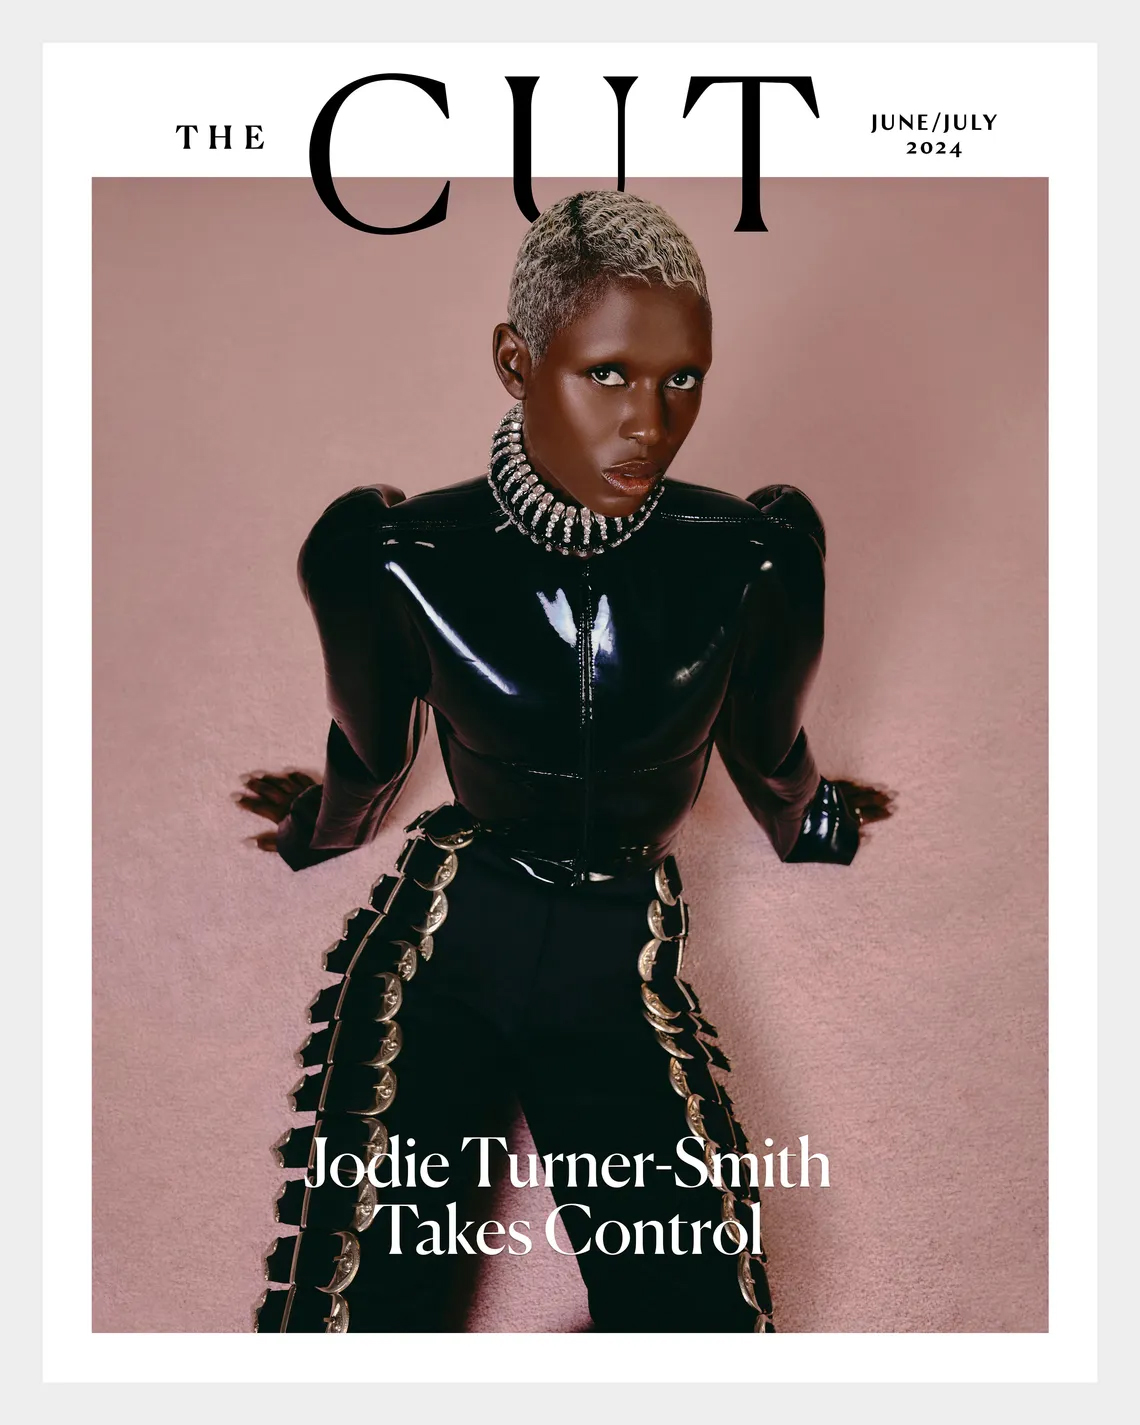 Jodie Turner-Smith on the cover of The Cut.